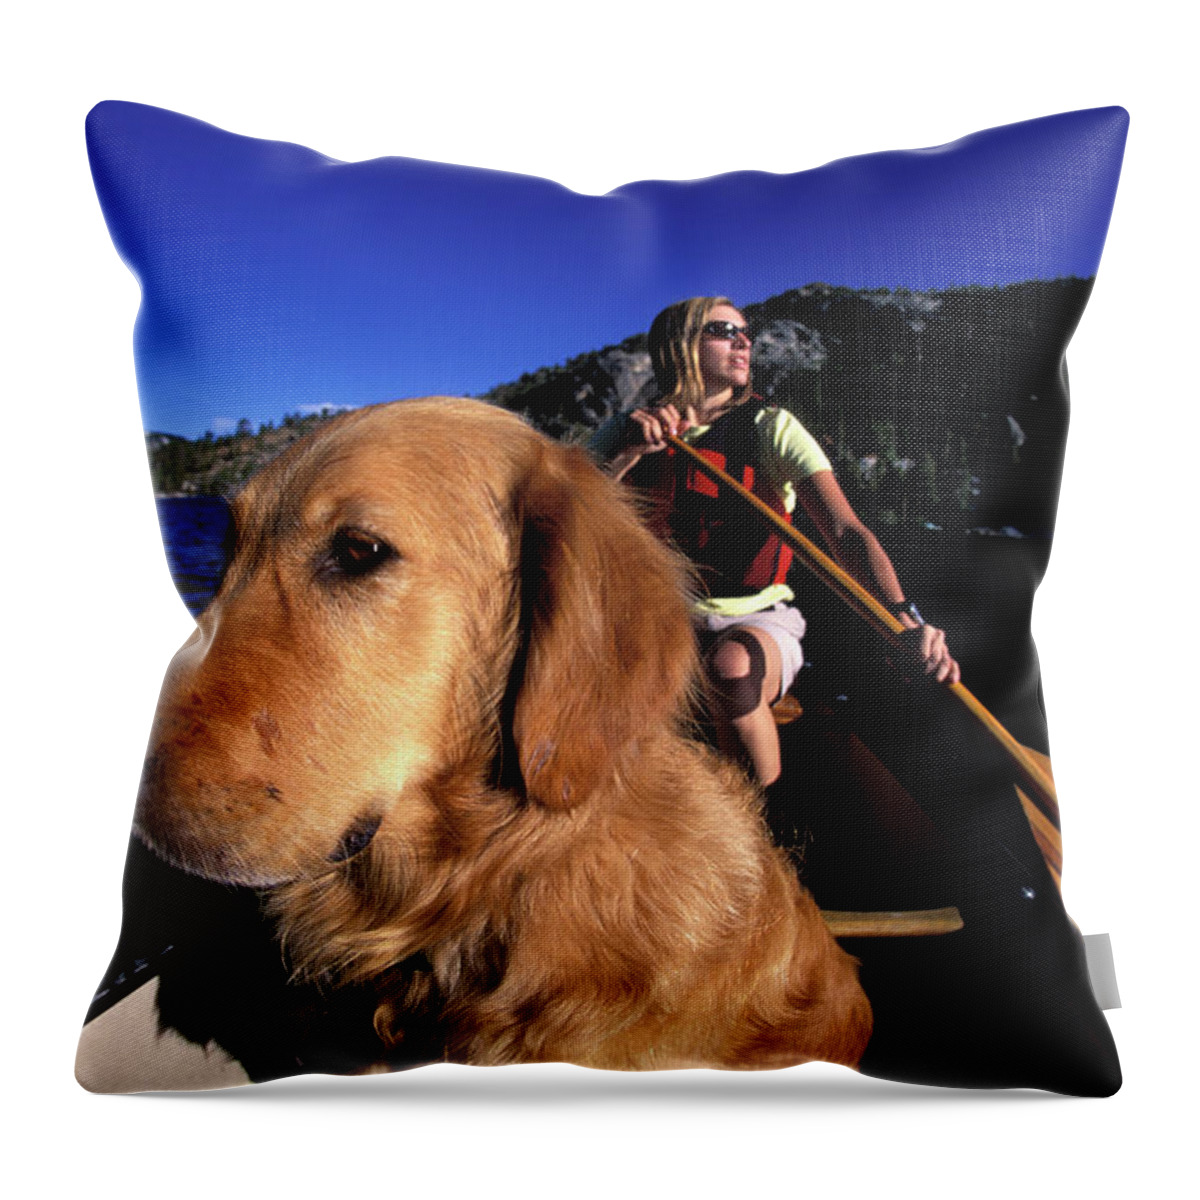 Adult Throw Pillow featuring the photograph A Man, Woman, And Dog In A Canoe #4 by Corey Rich